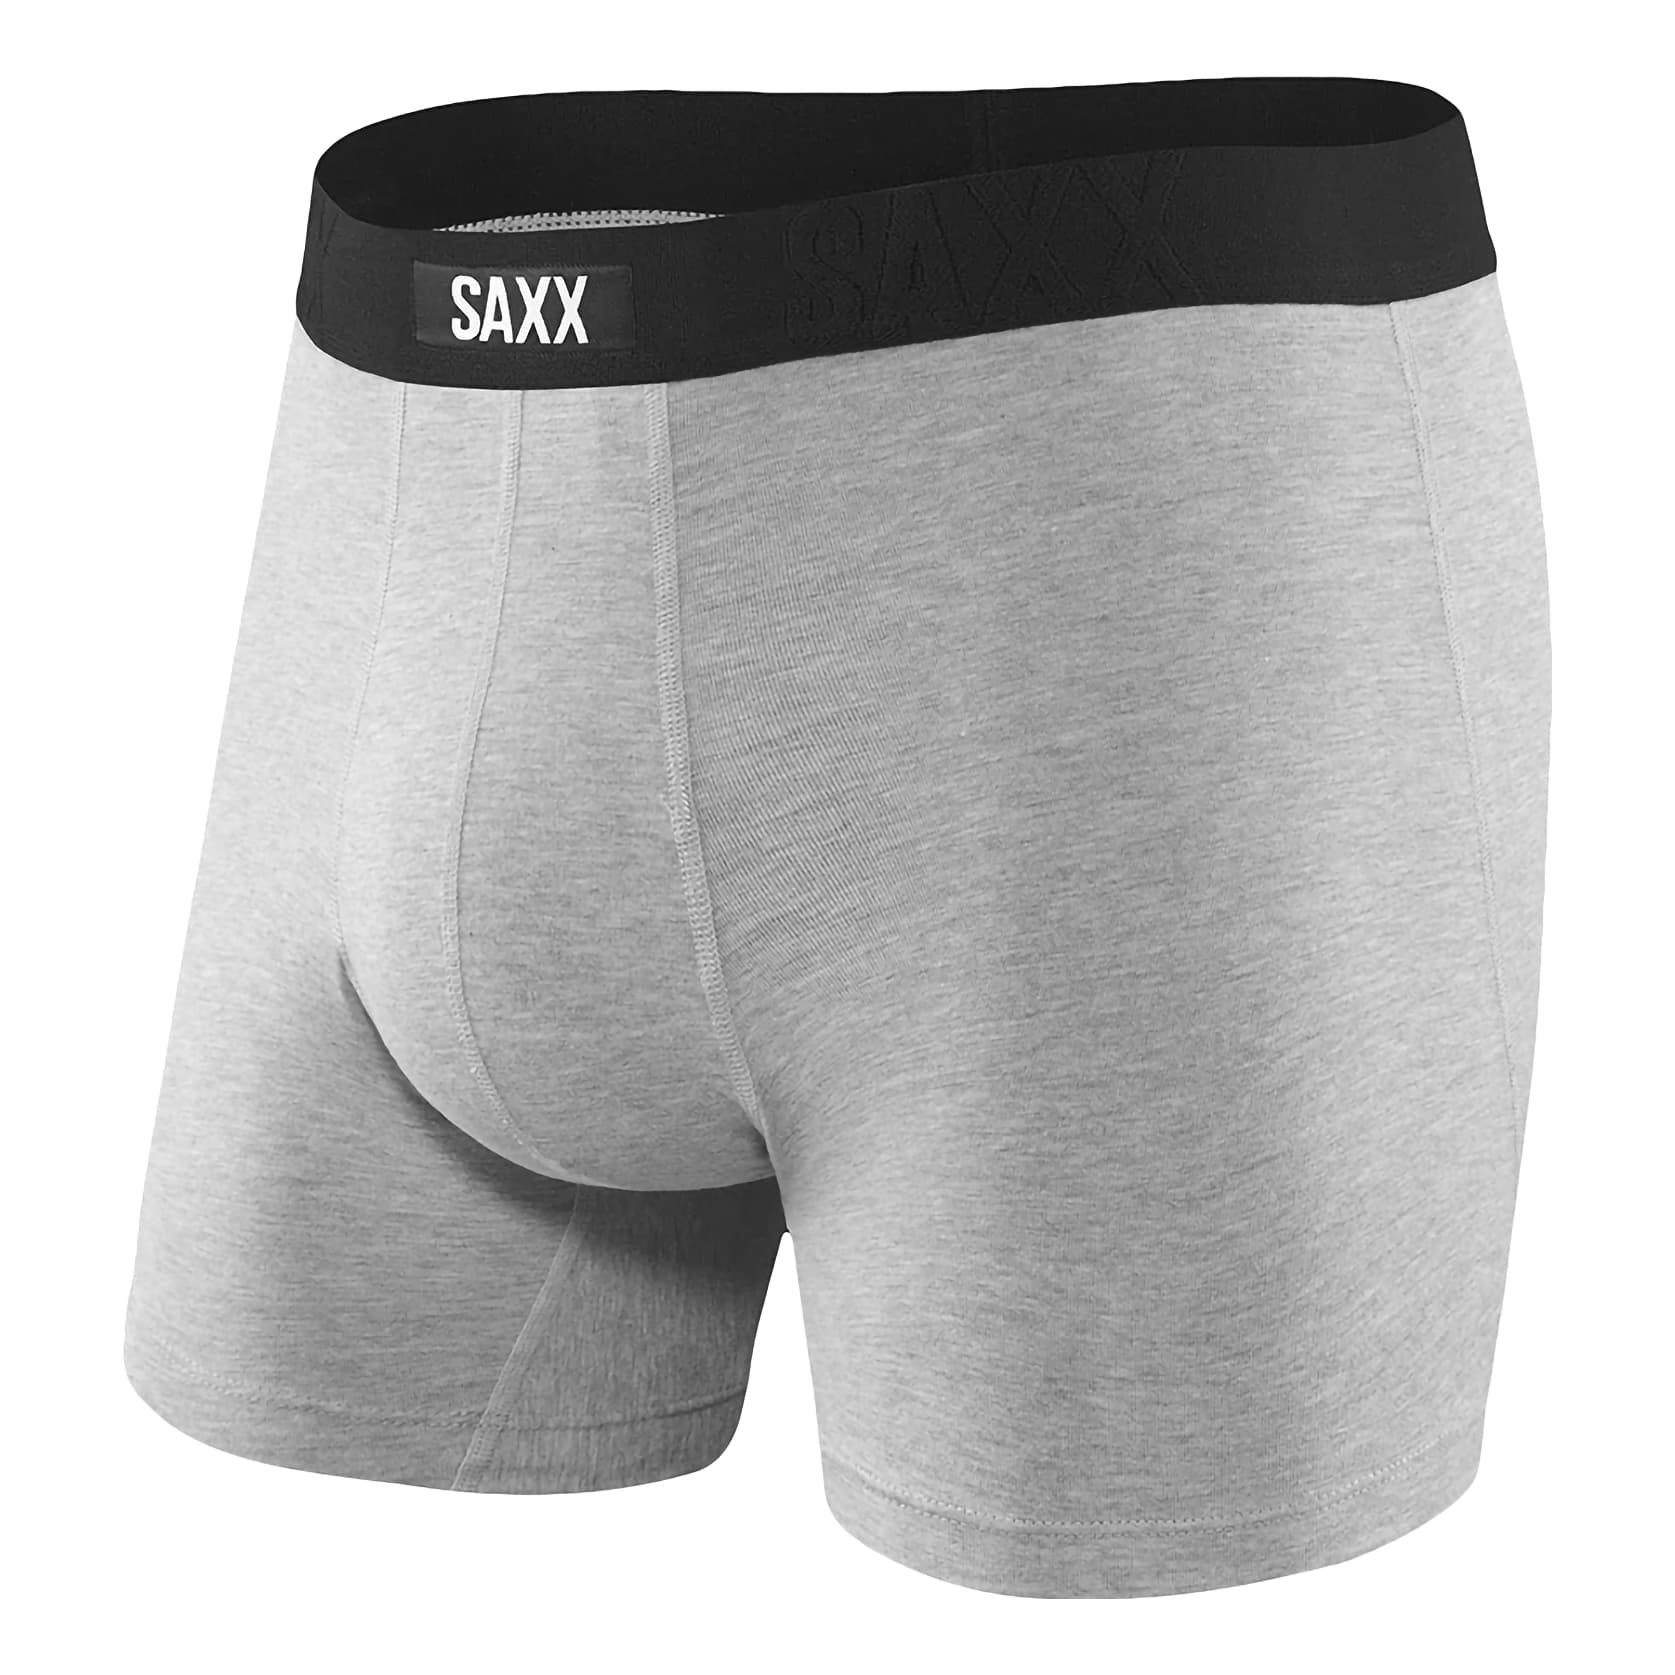 Saxx® Men’s Undercover Boxer Brief with Fly - Heather Grey